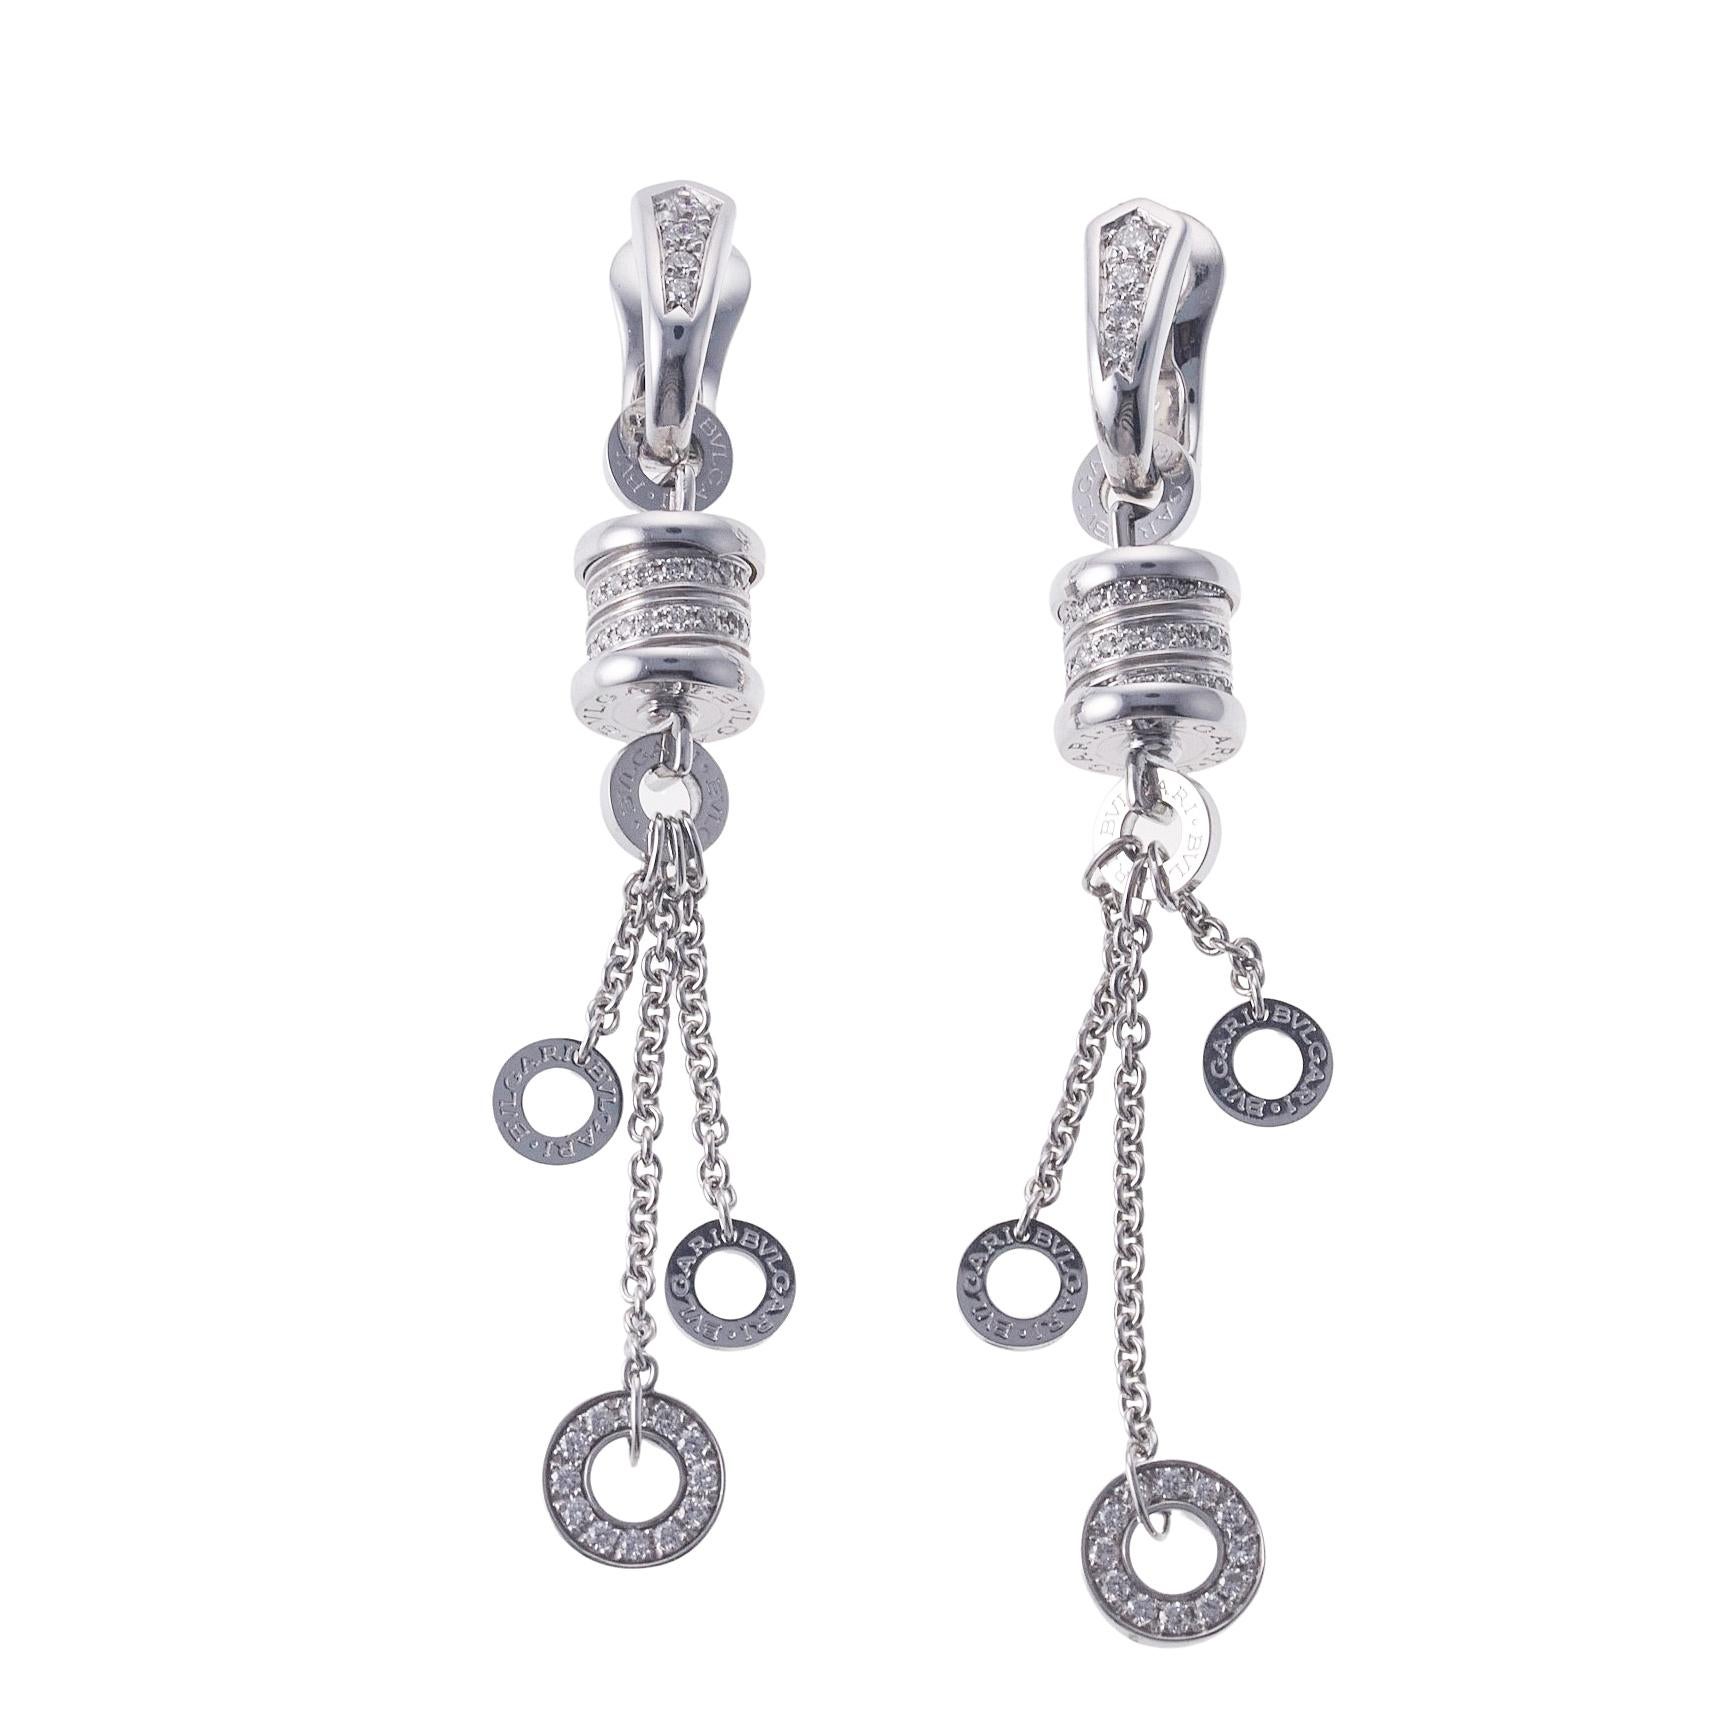 Pair of 18k white gold drop earrings by Bvlgari for B.Zero1 collection, set with approx. 0.84ctw in VS/G diamonds. Earrings measure 70mm long. Marked: Bvlgari, made in Italy, 750. Weight is 20.0 grams.